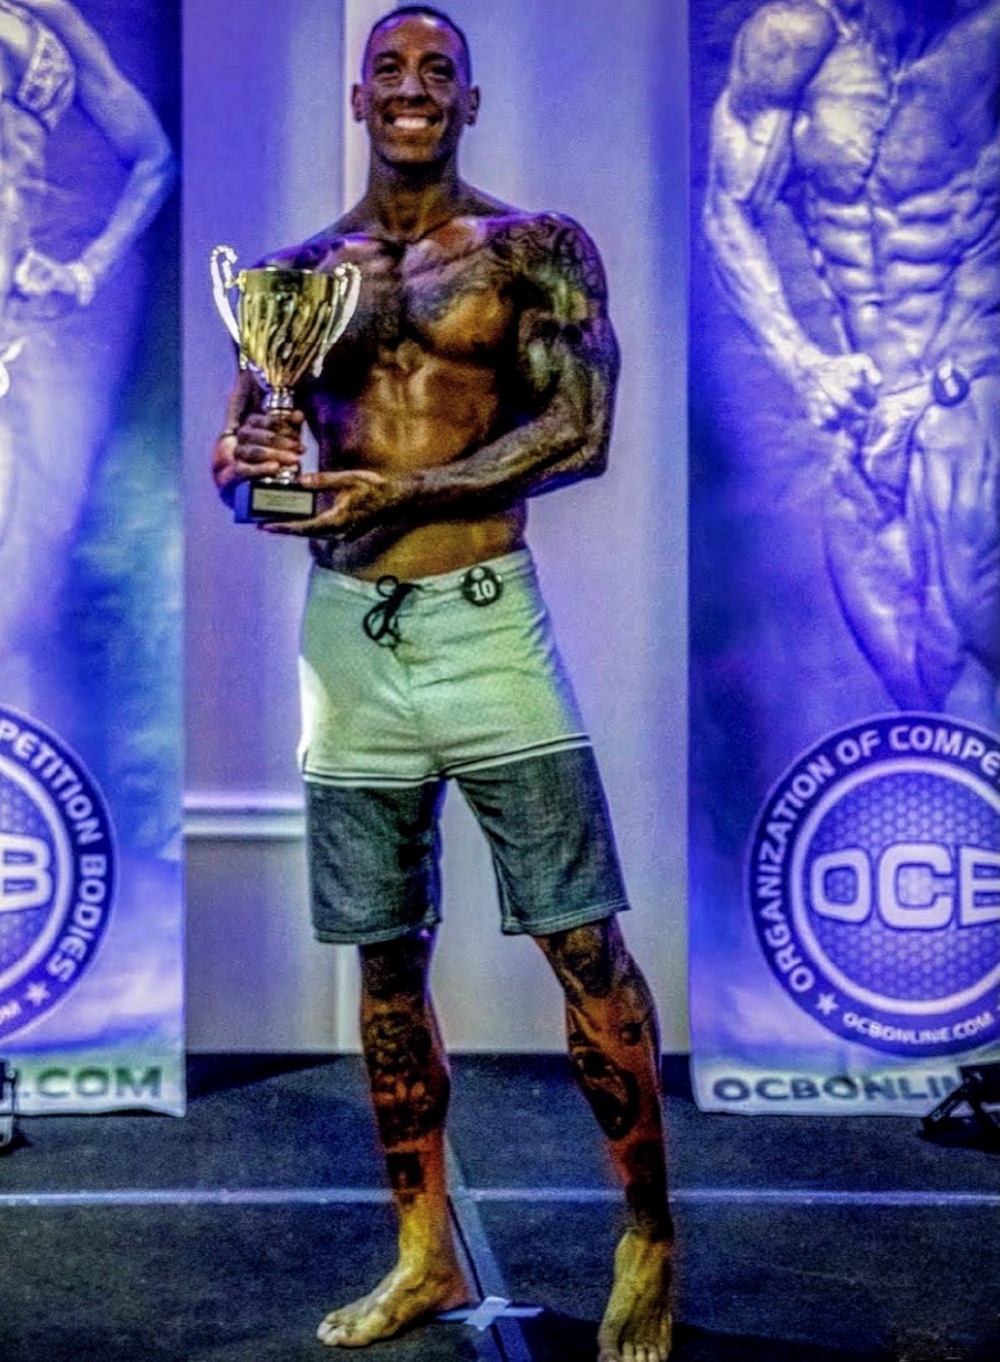 From Paralysis to Competitive Bodybuilding – One Sailor’s Story of Grit and Determination